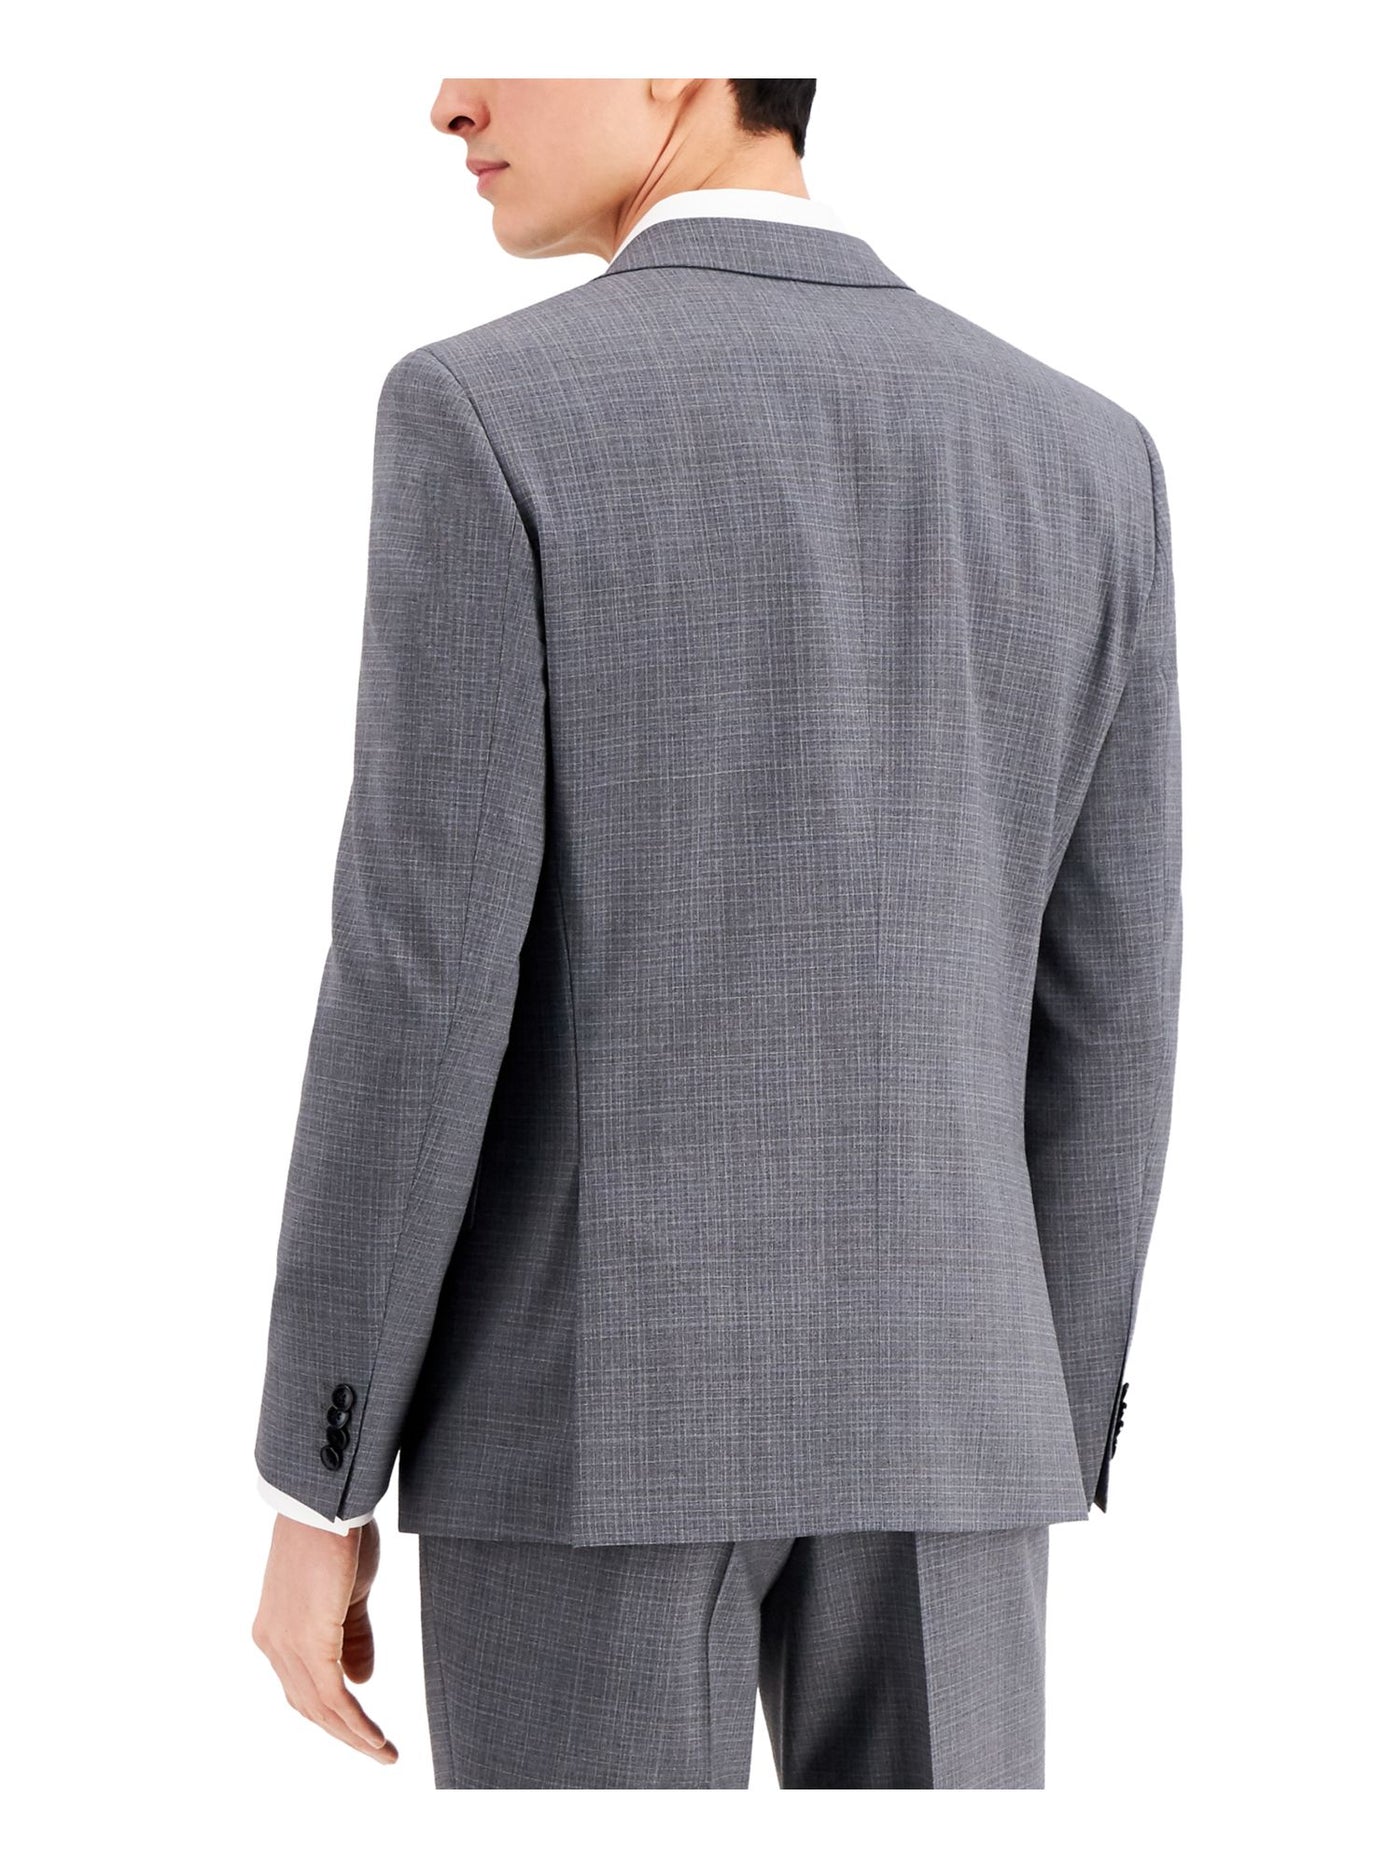 HUGO BOSS Mens Boss Red Label Gray Single Breasted, Plaid Slim Fit Suit Separate Blazer Jacket 36S